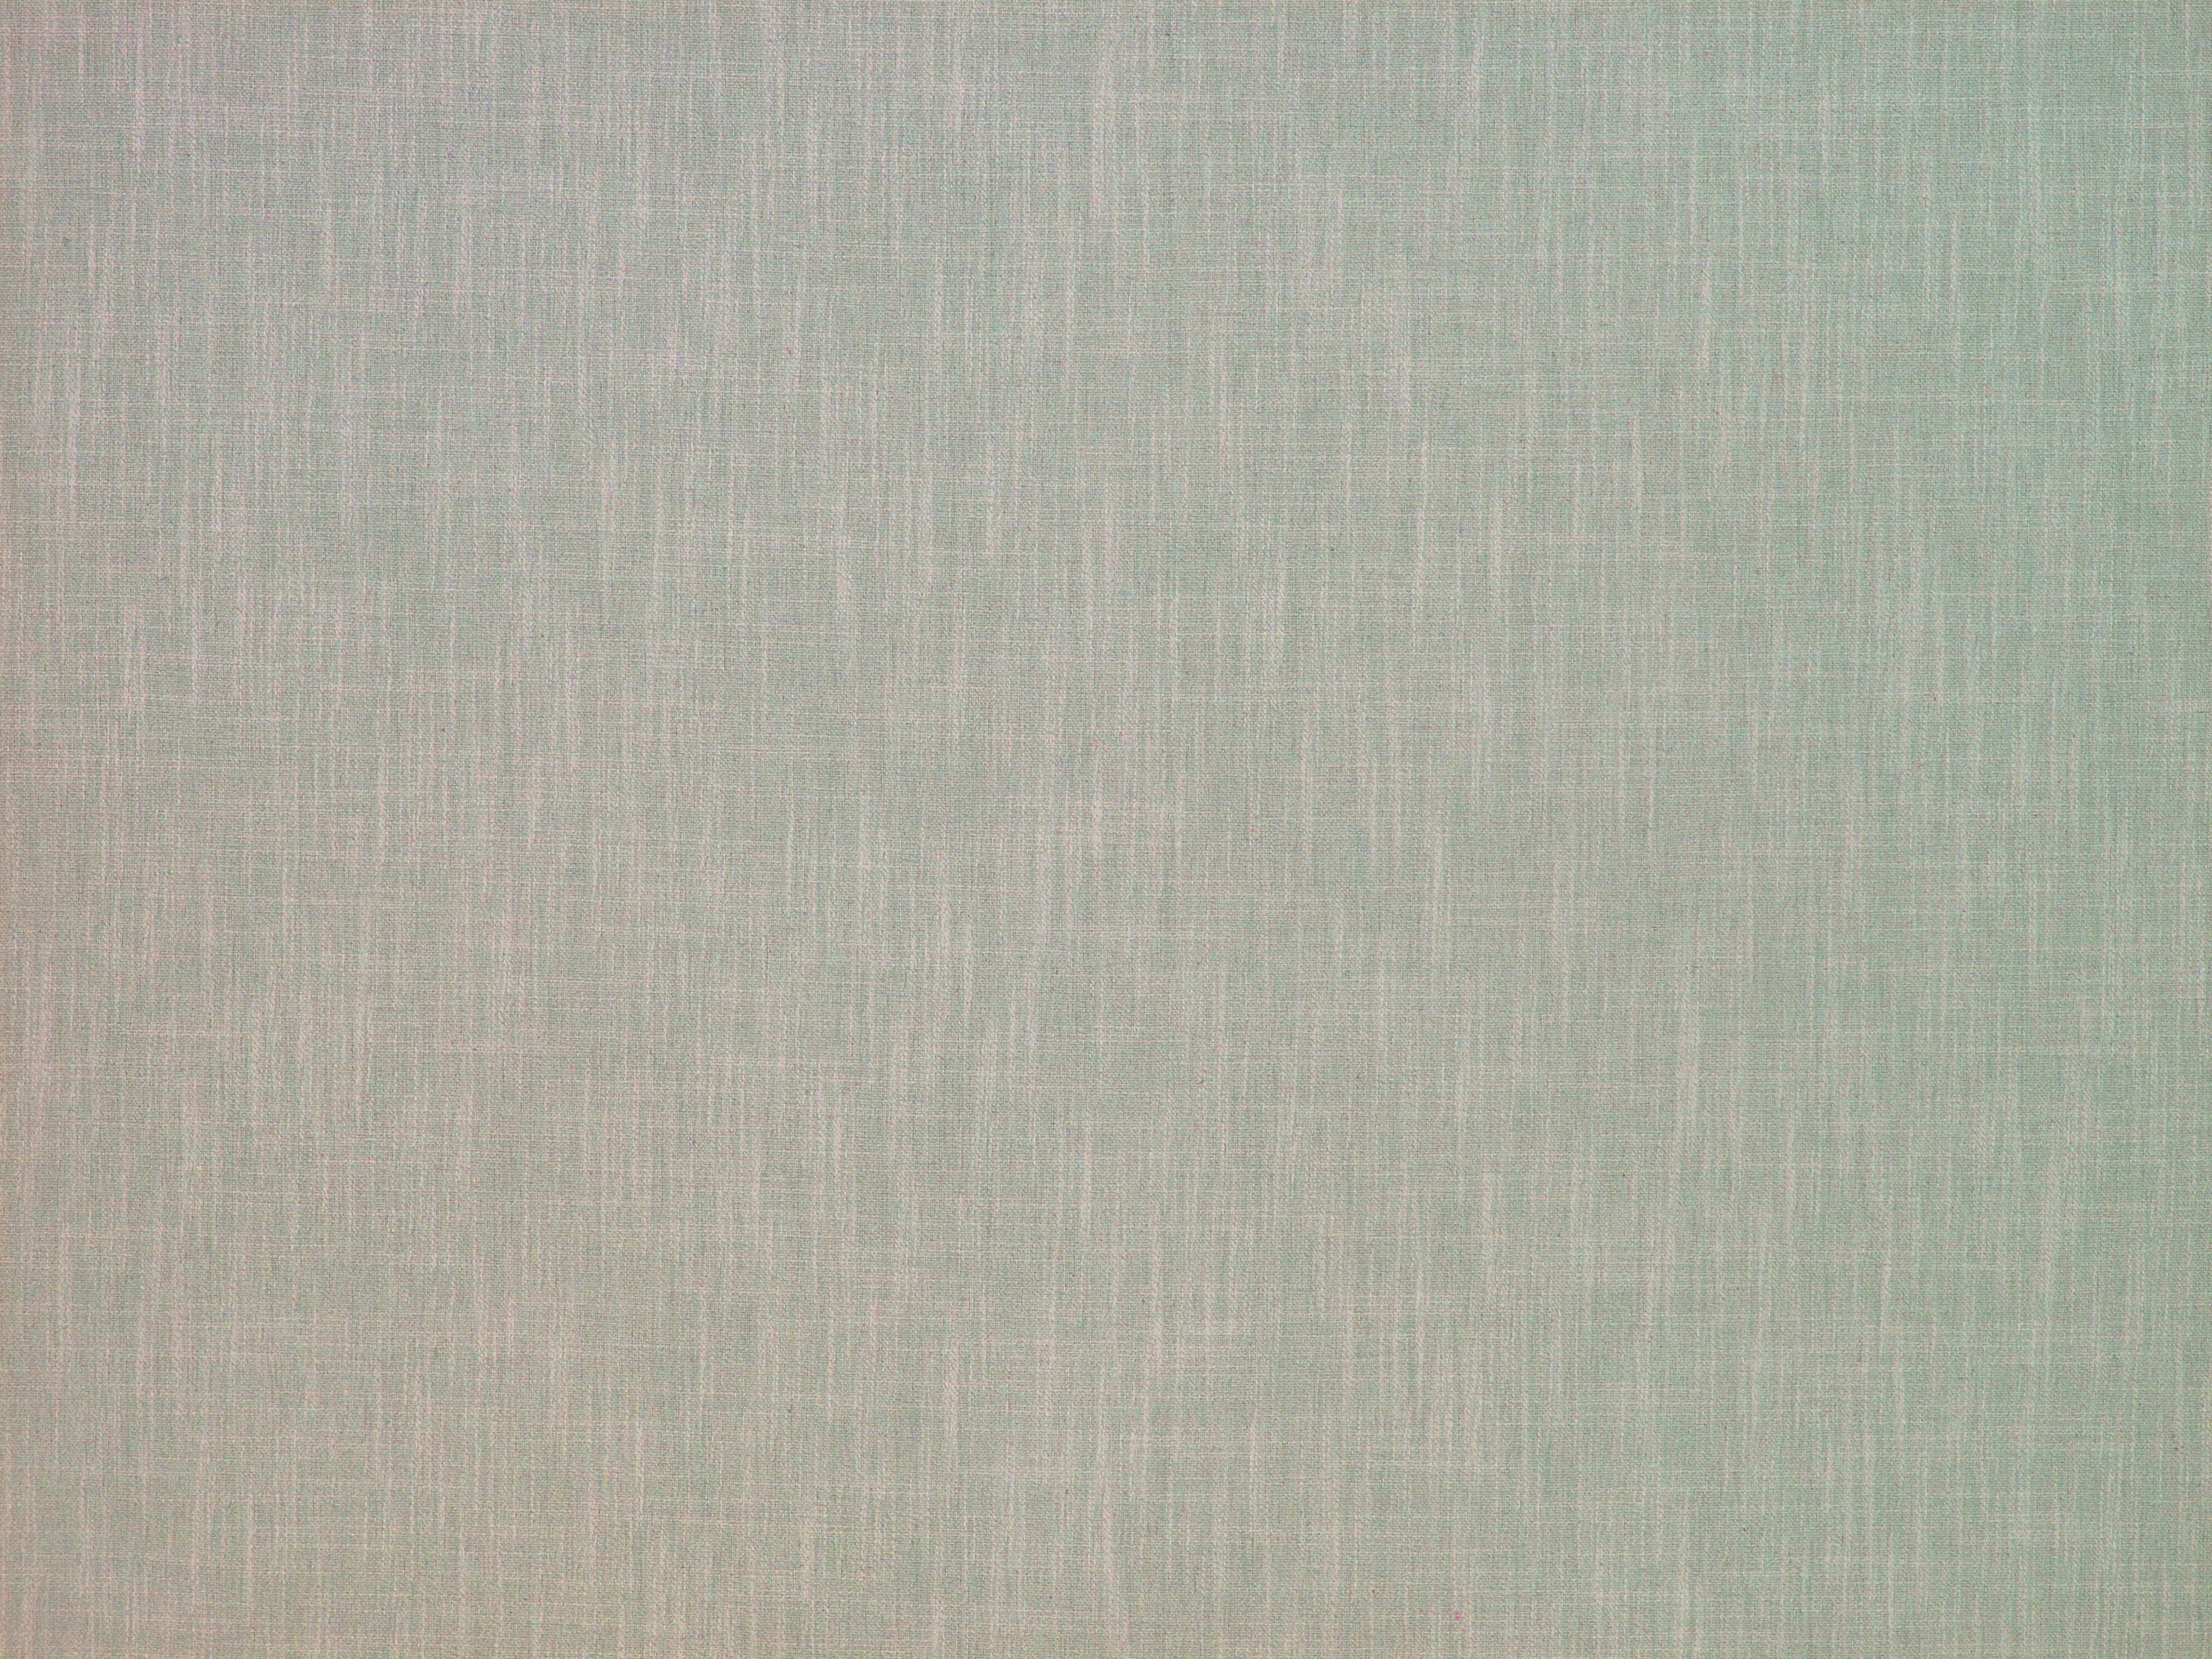 Flax fabric in blue mist color - pattern number H6 0018FLAX - by Scalamandre in the Old World Weavers collection